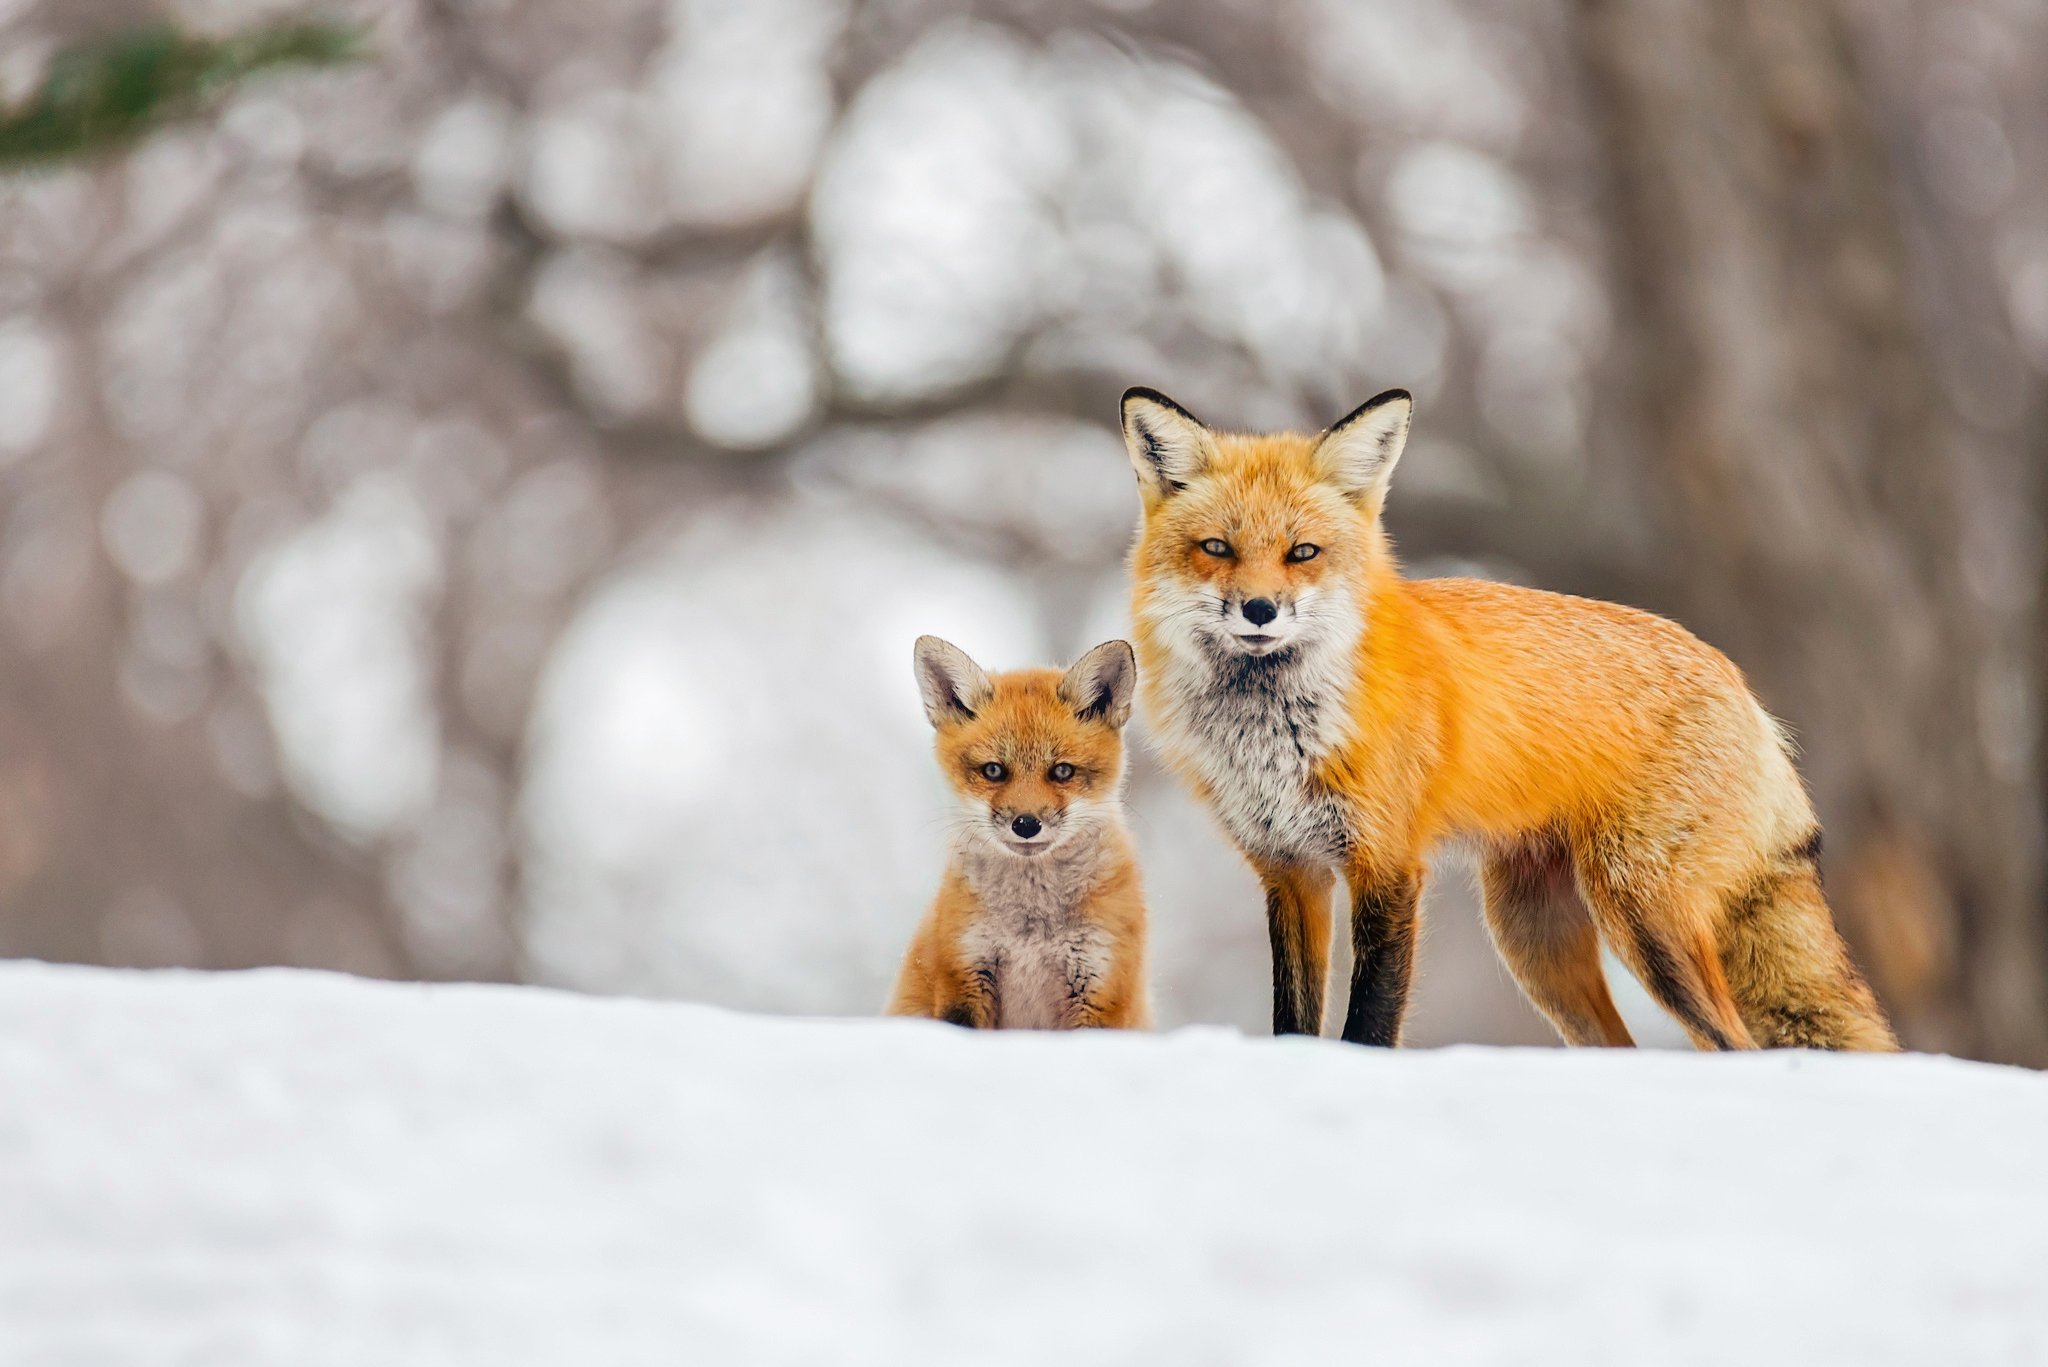 foxes, Cubs, Snow, Two, Fox Wallpapers HD / Desktop and Mobile Backgrounds